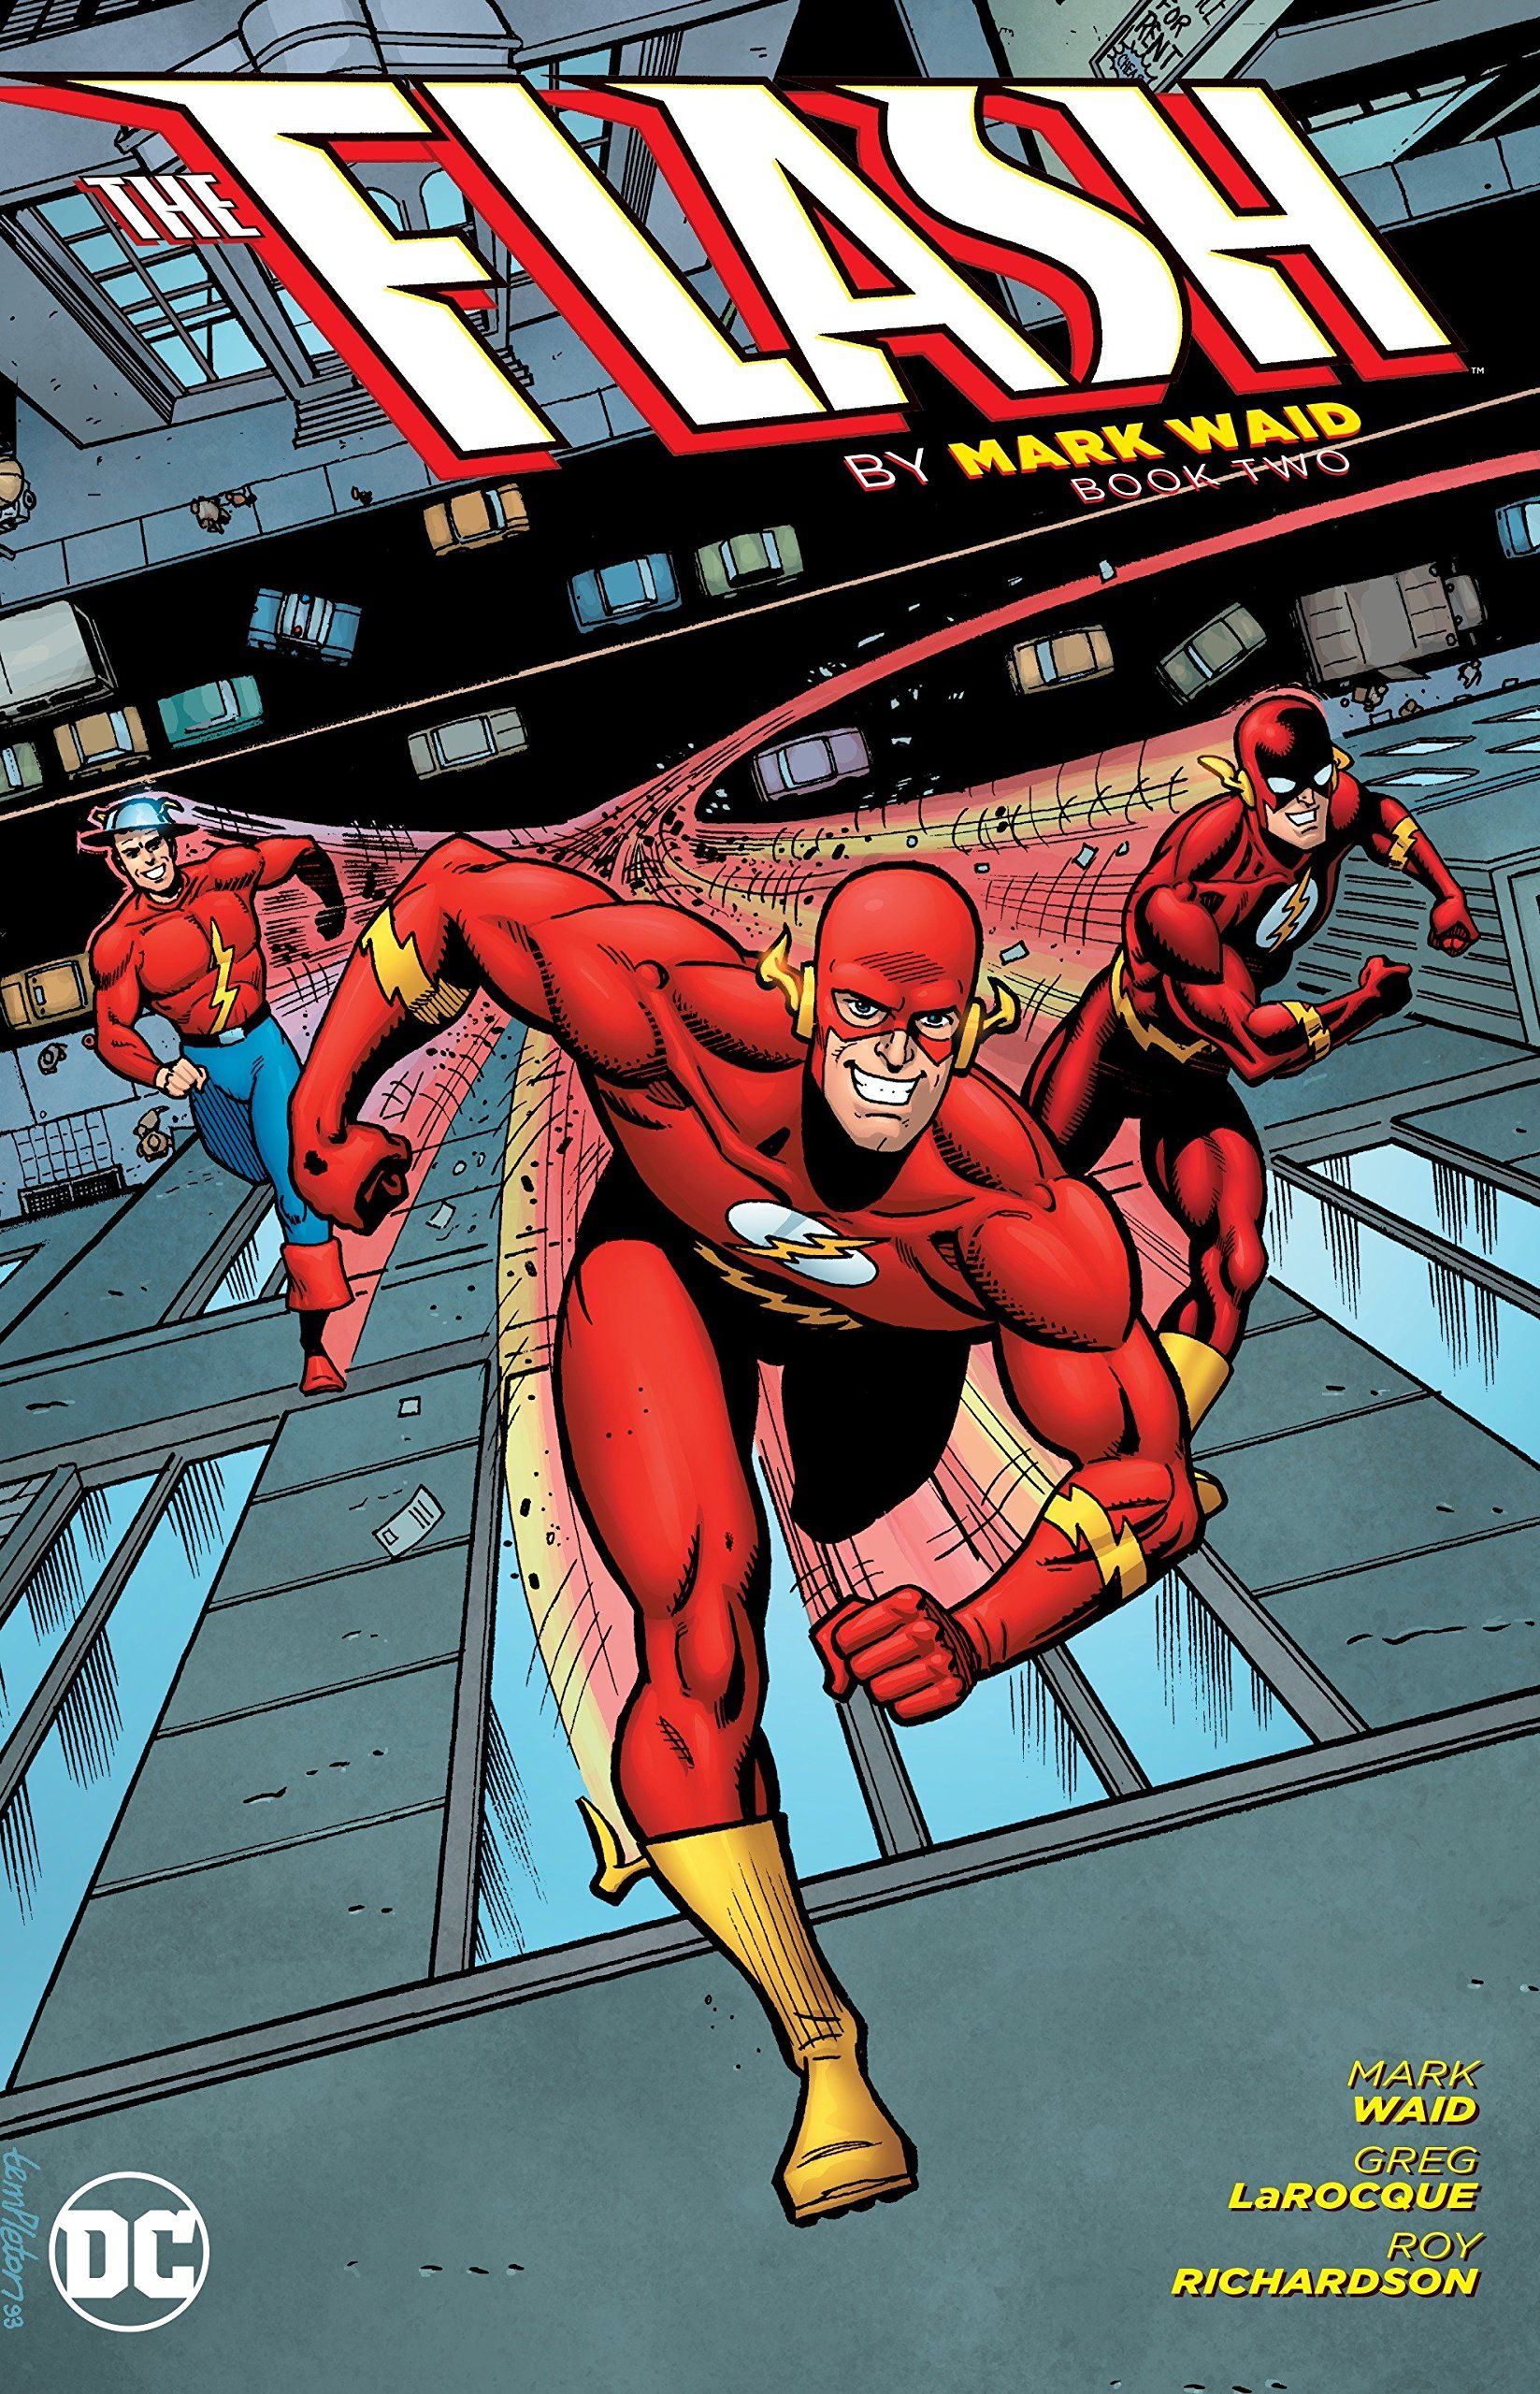 <p><strong>$19.96</strong></p><p>Barry Allen may have died, but The Flash did not. After Barry’s sacrifice, his nephew/teen sidekick Kid Flash aka Wally West took up the mantle, carrying on The Flash name. After a rocky and unassured start, Wally soon grew into a successful hero, eventually gaining the confidence to become one of the most relatable and compassionate superheroes in all of comics. But that confidence took a hard blow during one of the best stories of the Wally West era, “The Return of Barry Allen.”</p><p>Written by Mark Waid and penciled by Greg LaRocque, “The Return of Barry Allen” sees a Christmas celebration interrupted by what appears to be Wally West’s uncle and mentor, alive and in the flesh. Although elated by his predecessor’s reappearance, Wally feels his insecurities come rushing back, especially when Barry makes his disappointment known. We won’t spoil the twist here, suffice it to say that “The Return of Barry Allen” serves as a reminder of what makes The Flash such a great hero, whether its Wally West or Barry Allen in the red tights.</p>